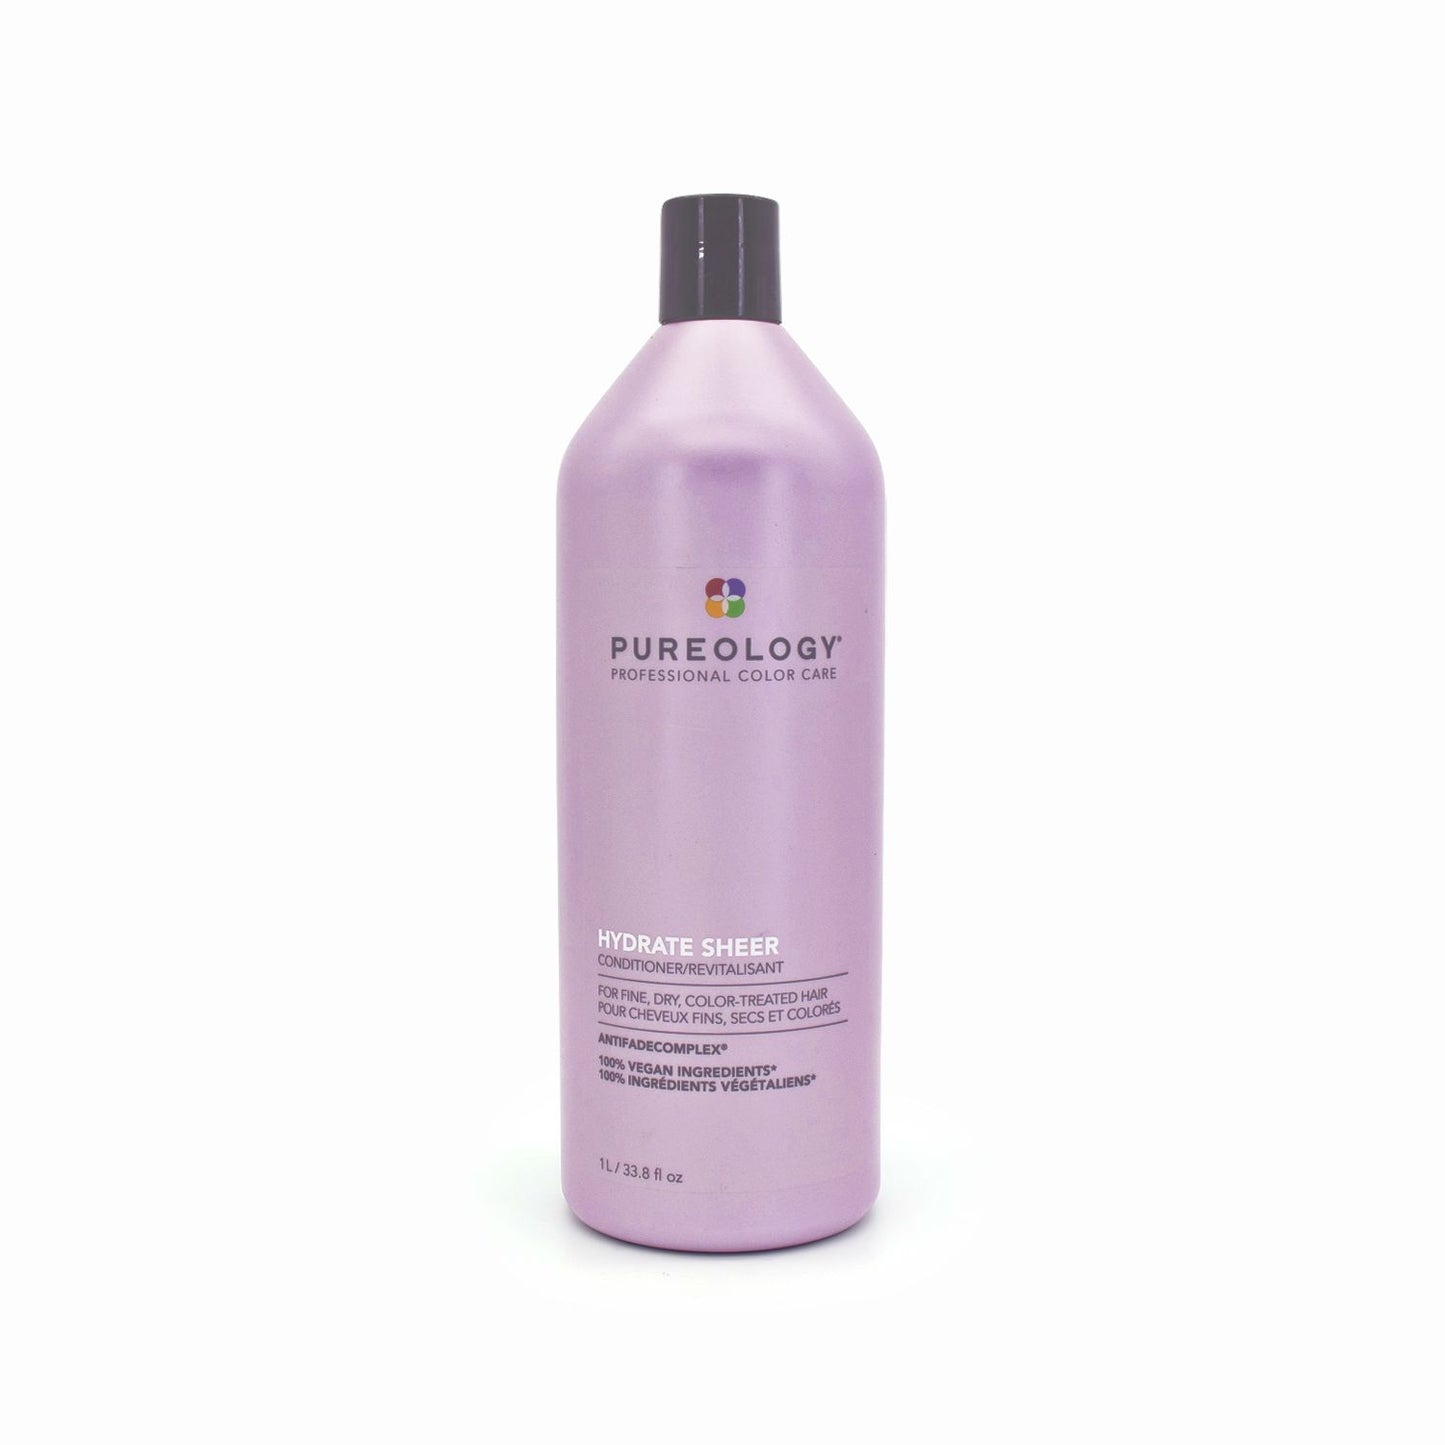 Pureology Hydrate Sheer Conditioner 1000ml - Imperfect Container